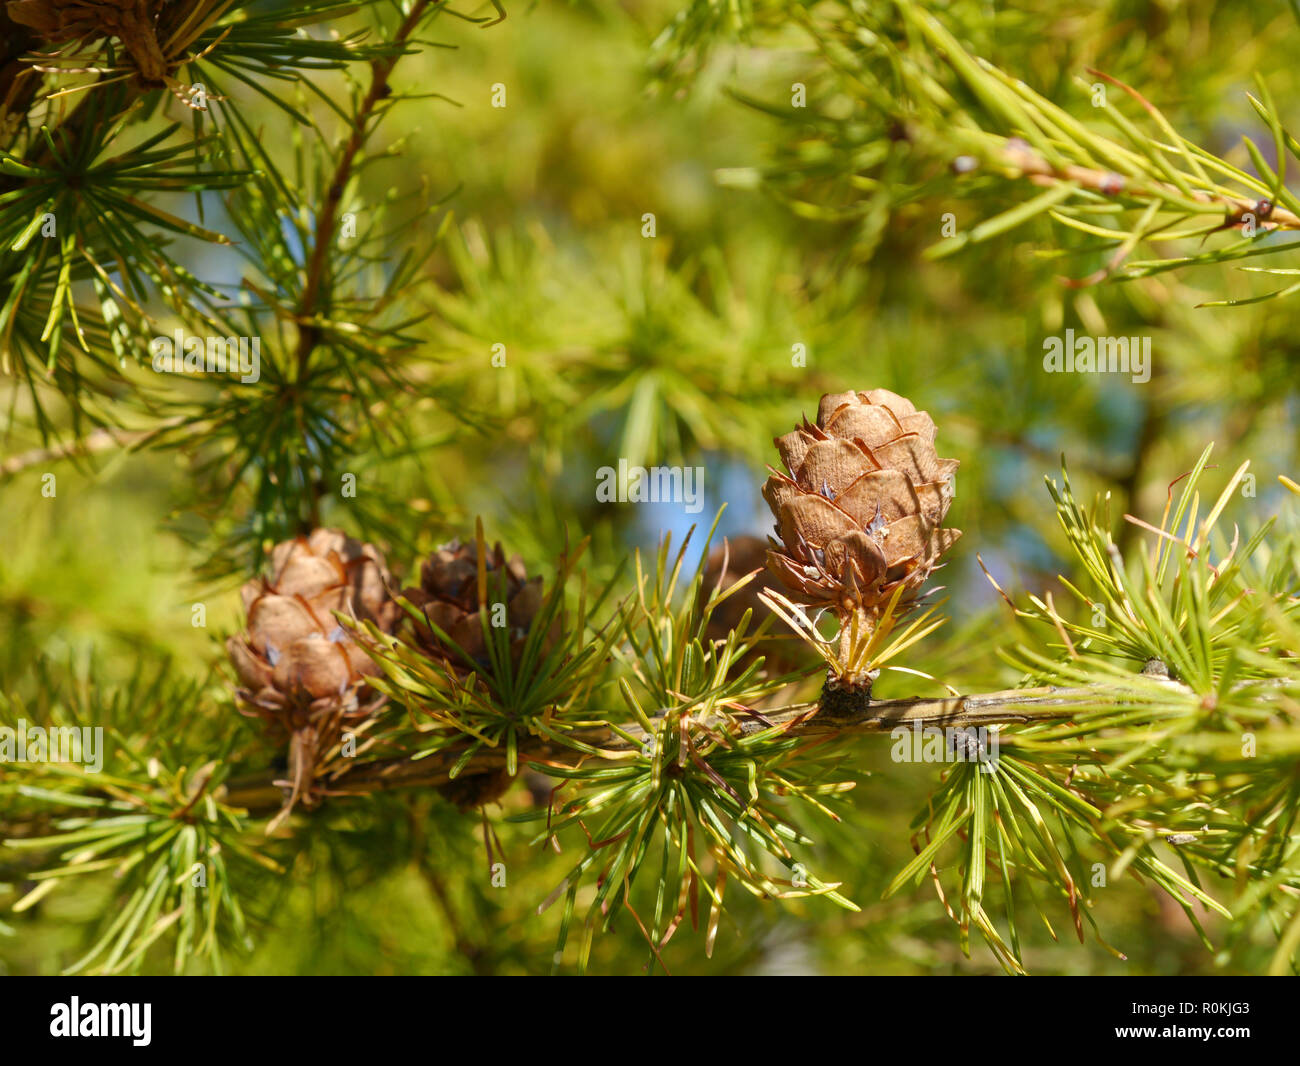 branches with cones from a larch tree Stock Photo